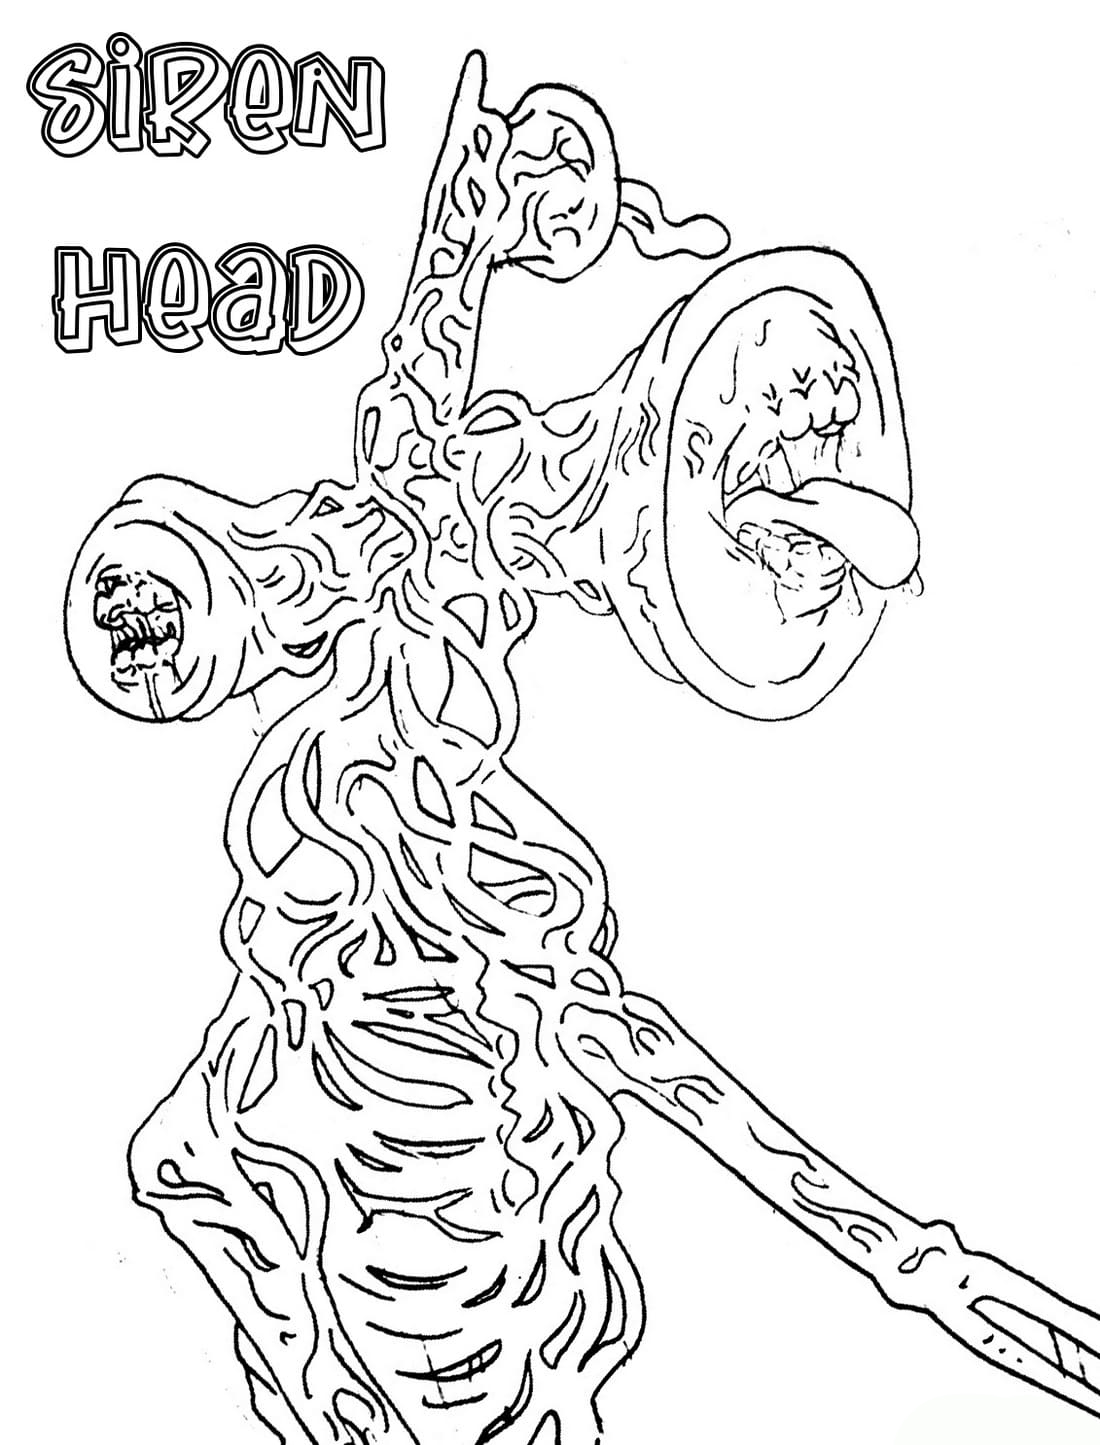 Coloring Pages Siren Head - Print